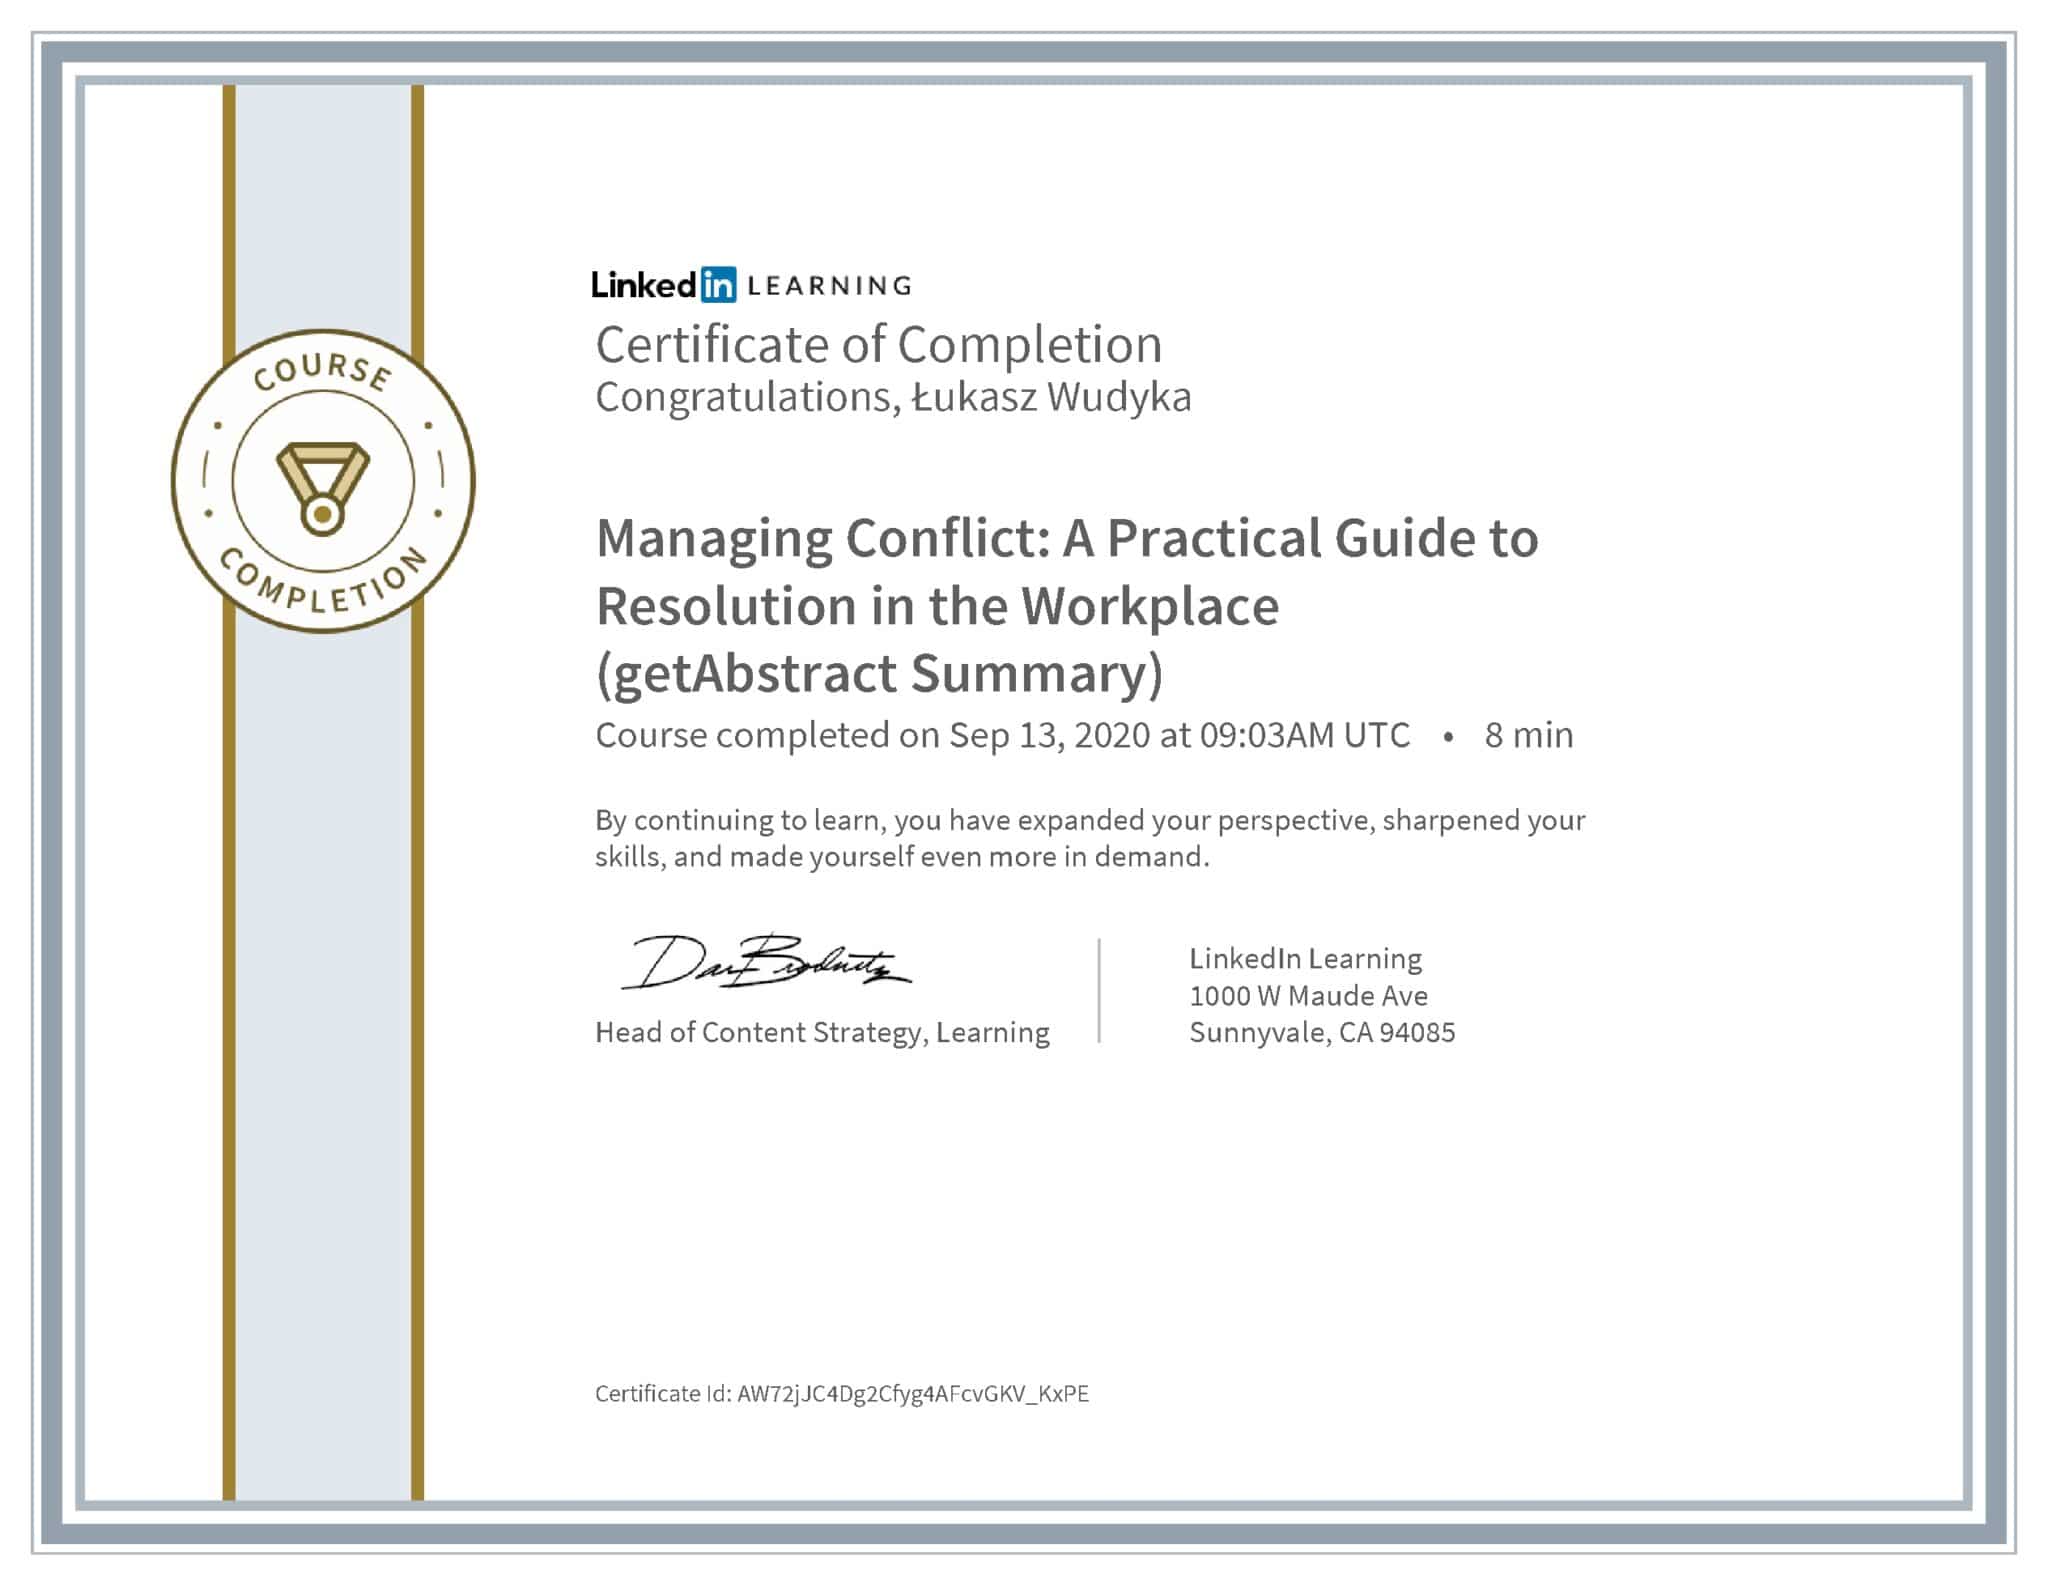 Łukasz Wudyka certyfikat LinkedIn Managing Conflict: A Practical Guide to Resolution in the Workplace (getAbstract Summary)